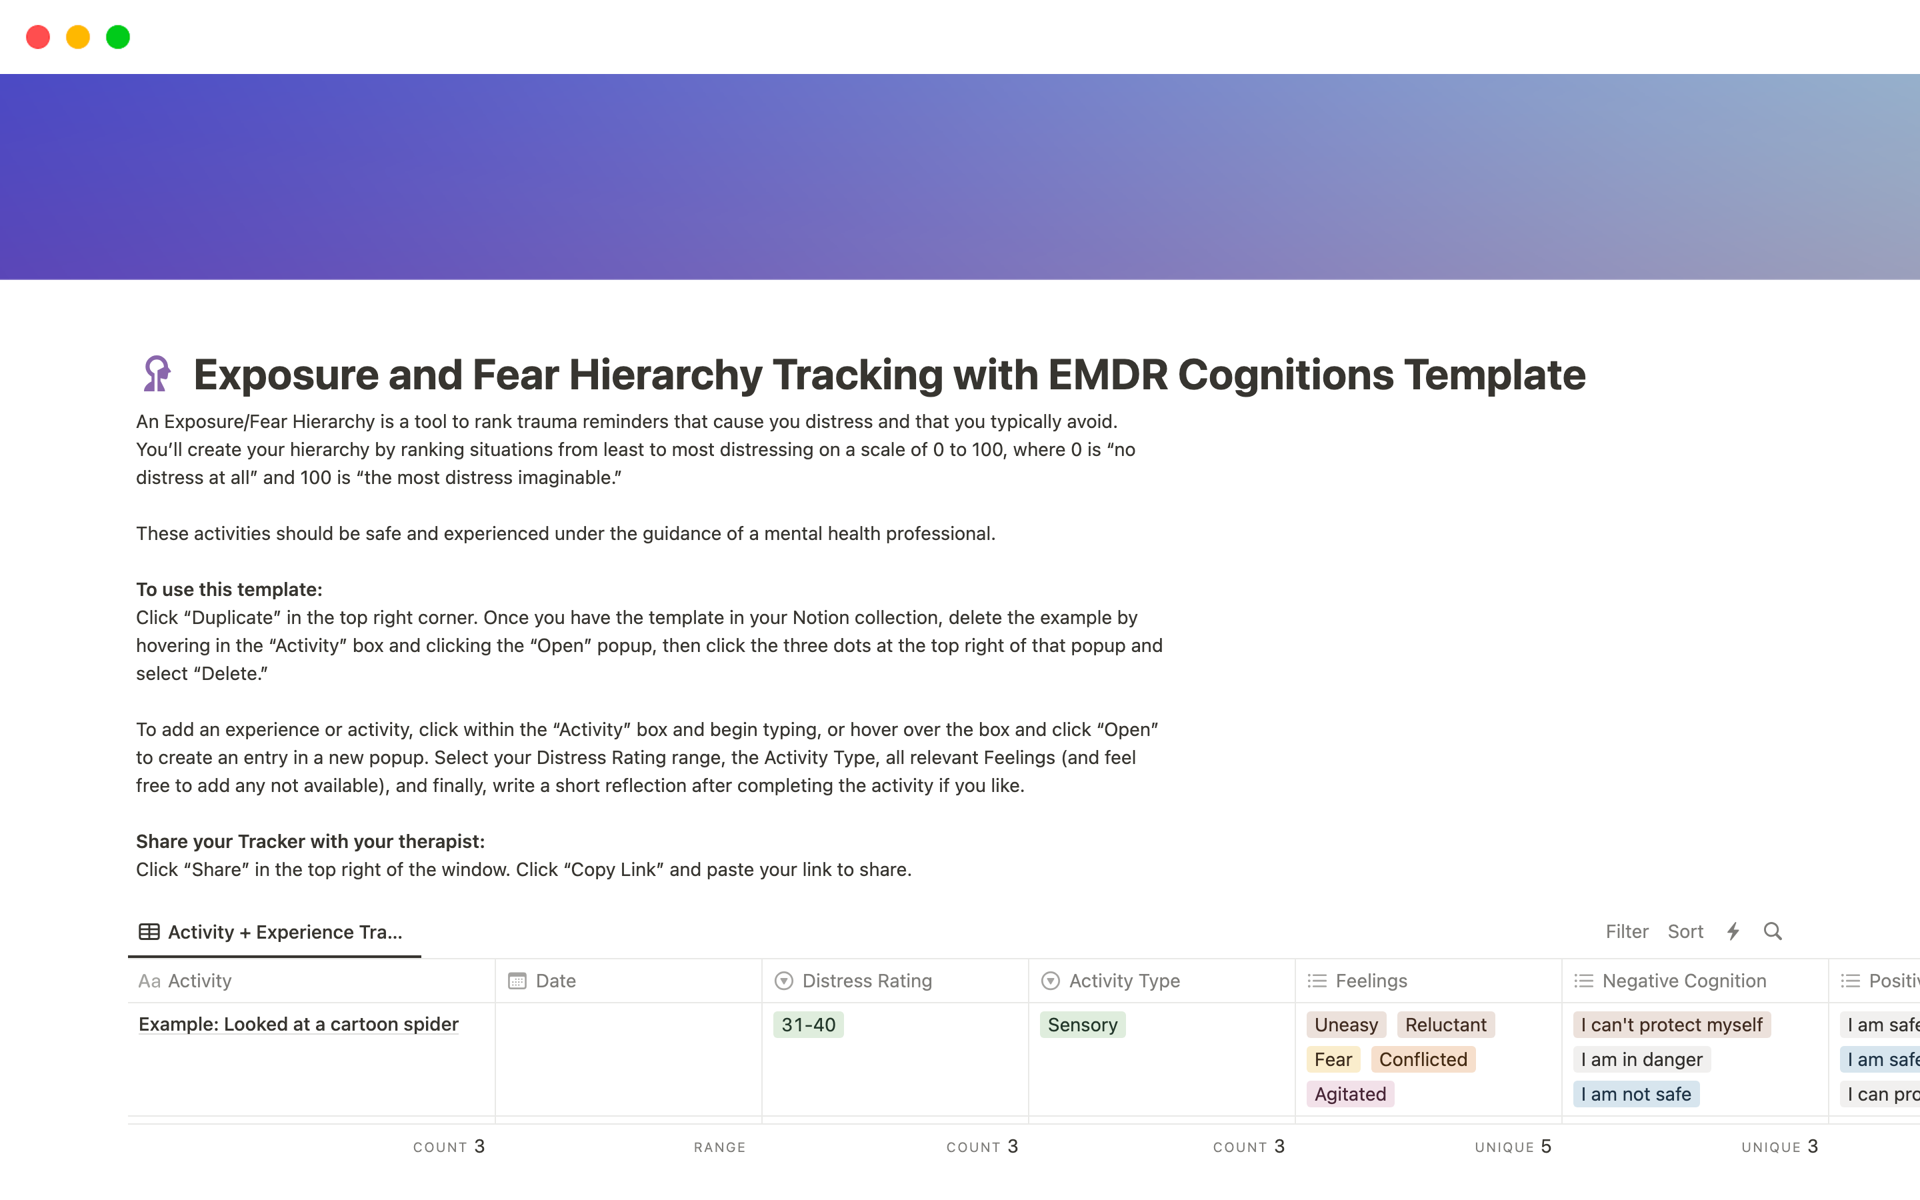 Exposure therapy exposure hierarchy tracker with EMDR cognitions.